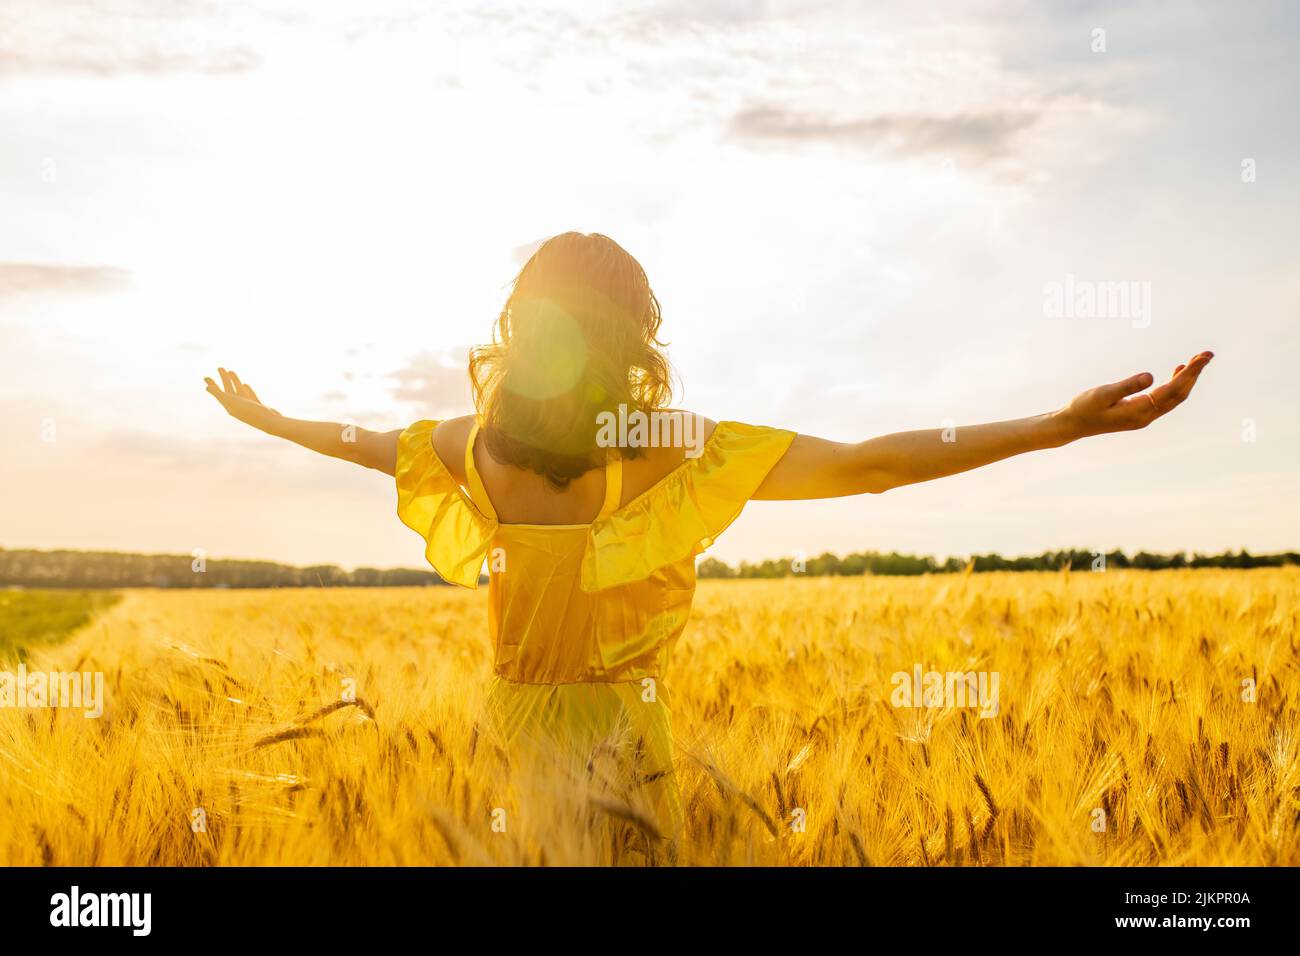 Young woman in yellow dress standing on a wheat field with sunrise on the background Stock Photo